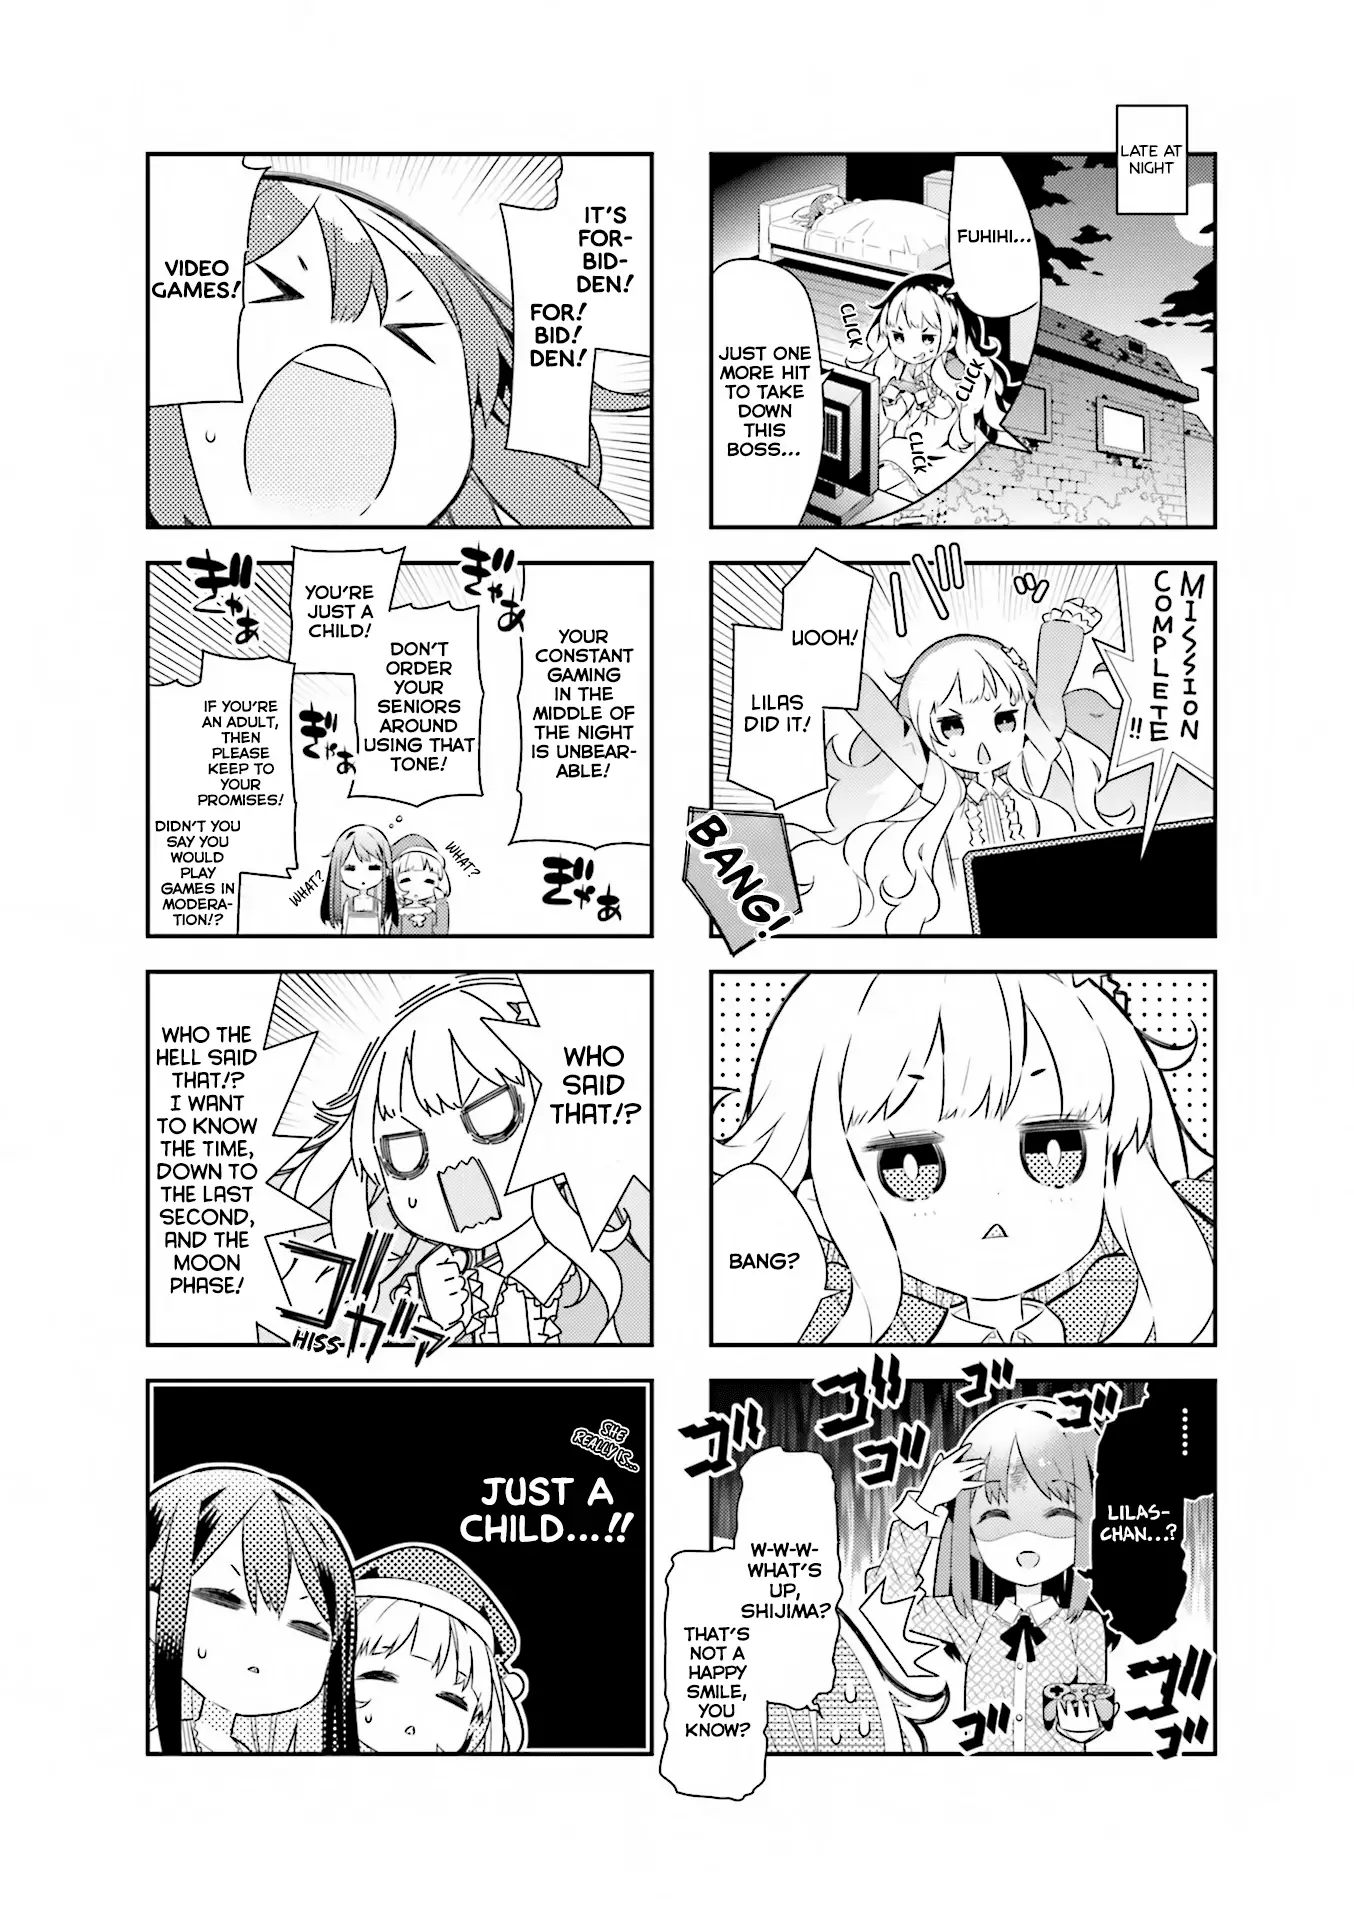 The Life After Retirement Of Magical Girls - 6 page 5-9363848c